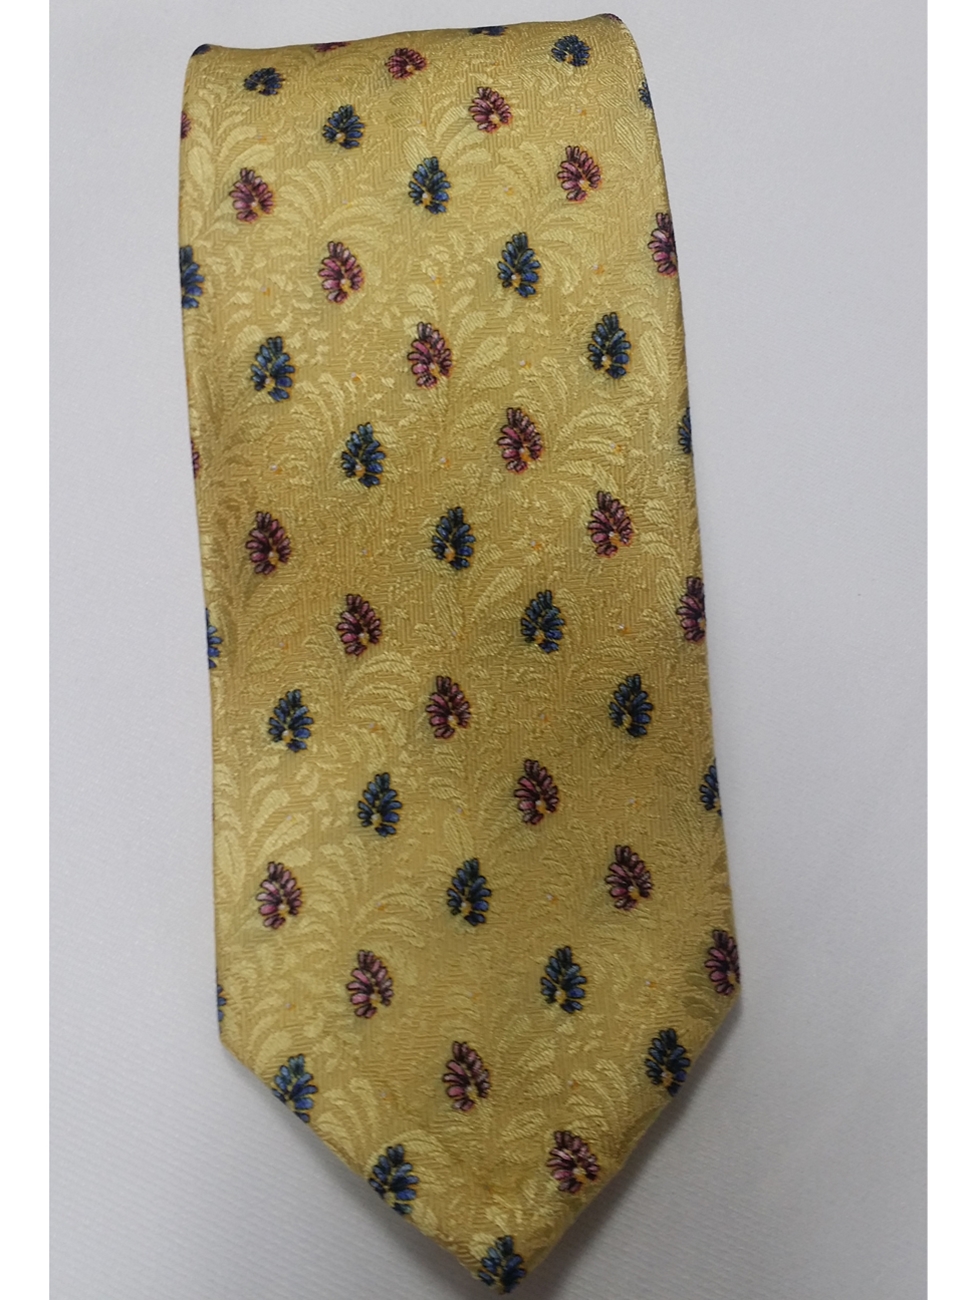 Golden With Blue And Pink Small Flowers 7 Fold Sudbury Tie | Robert ...